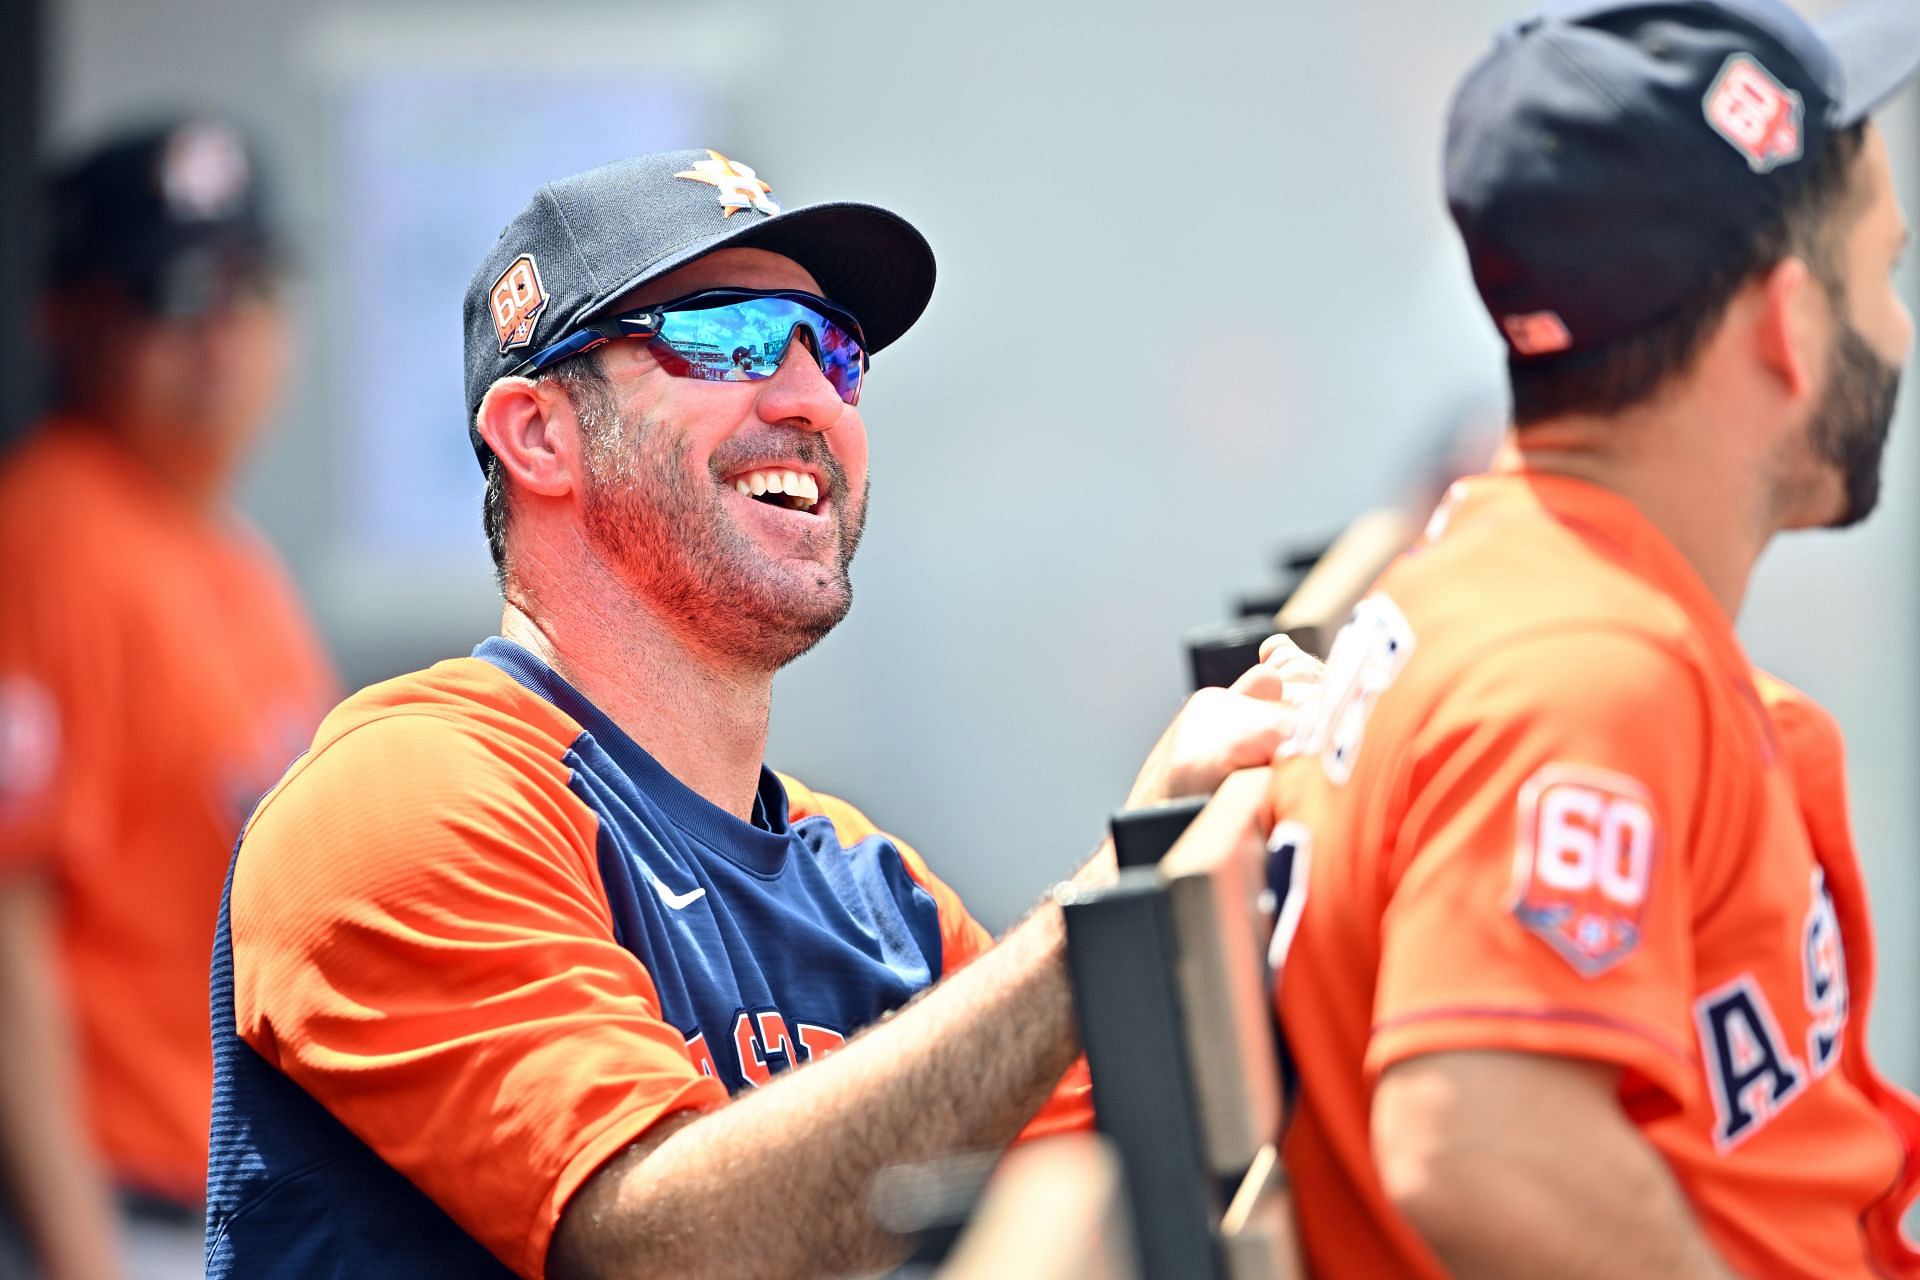 Justin Verlander is in line to win his third Cy Young Award this season.